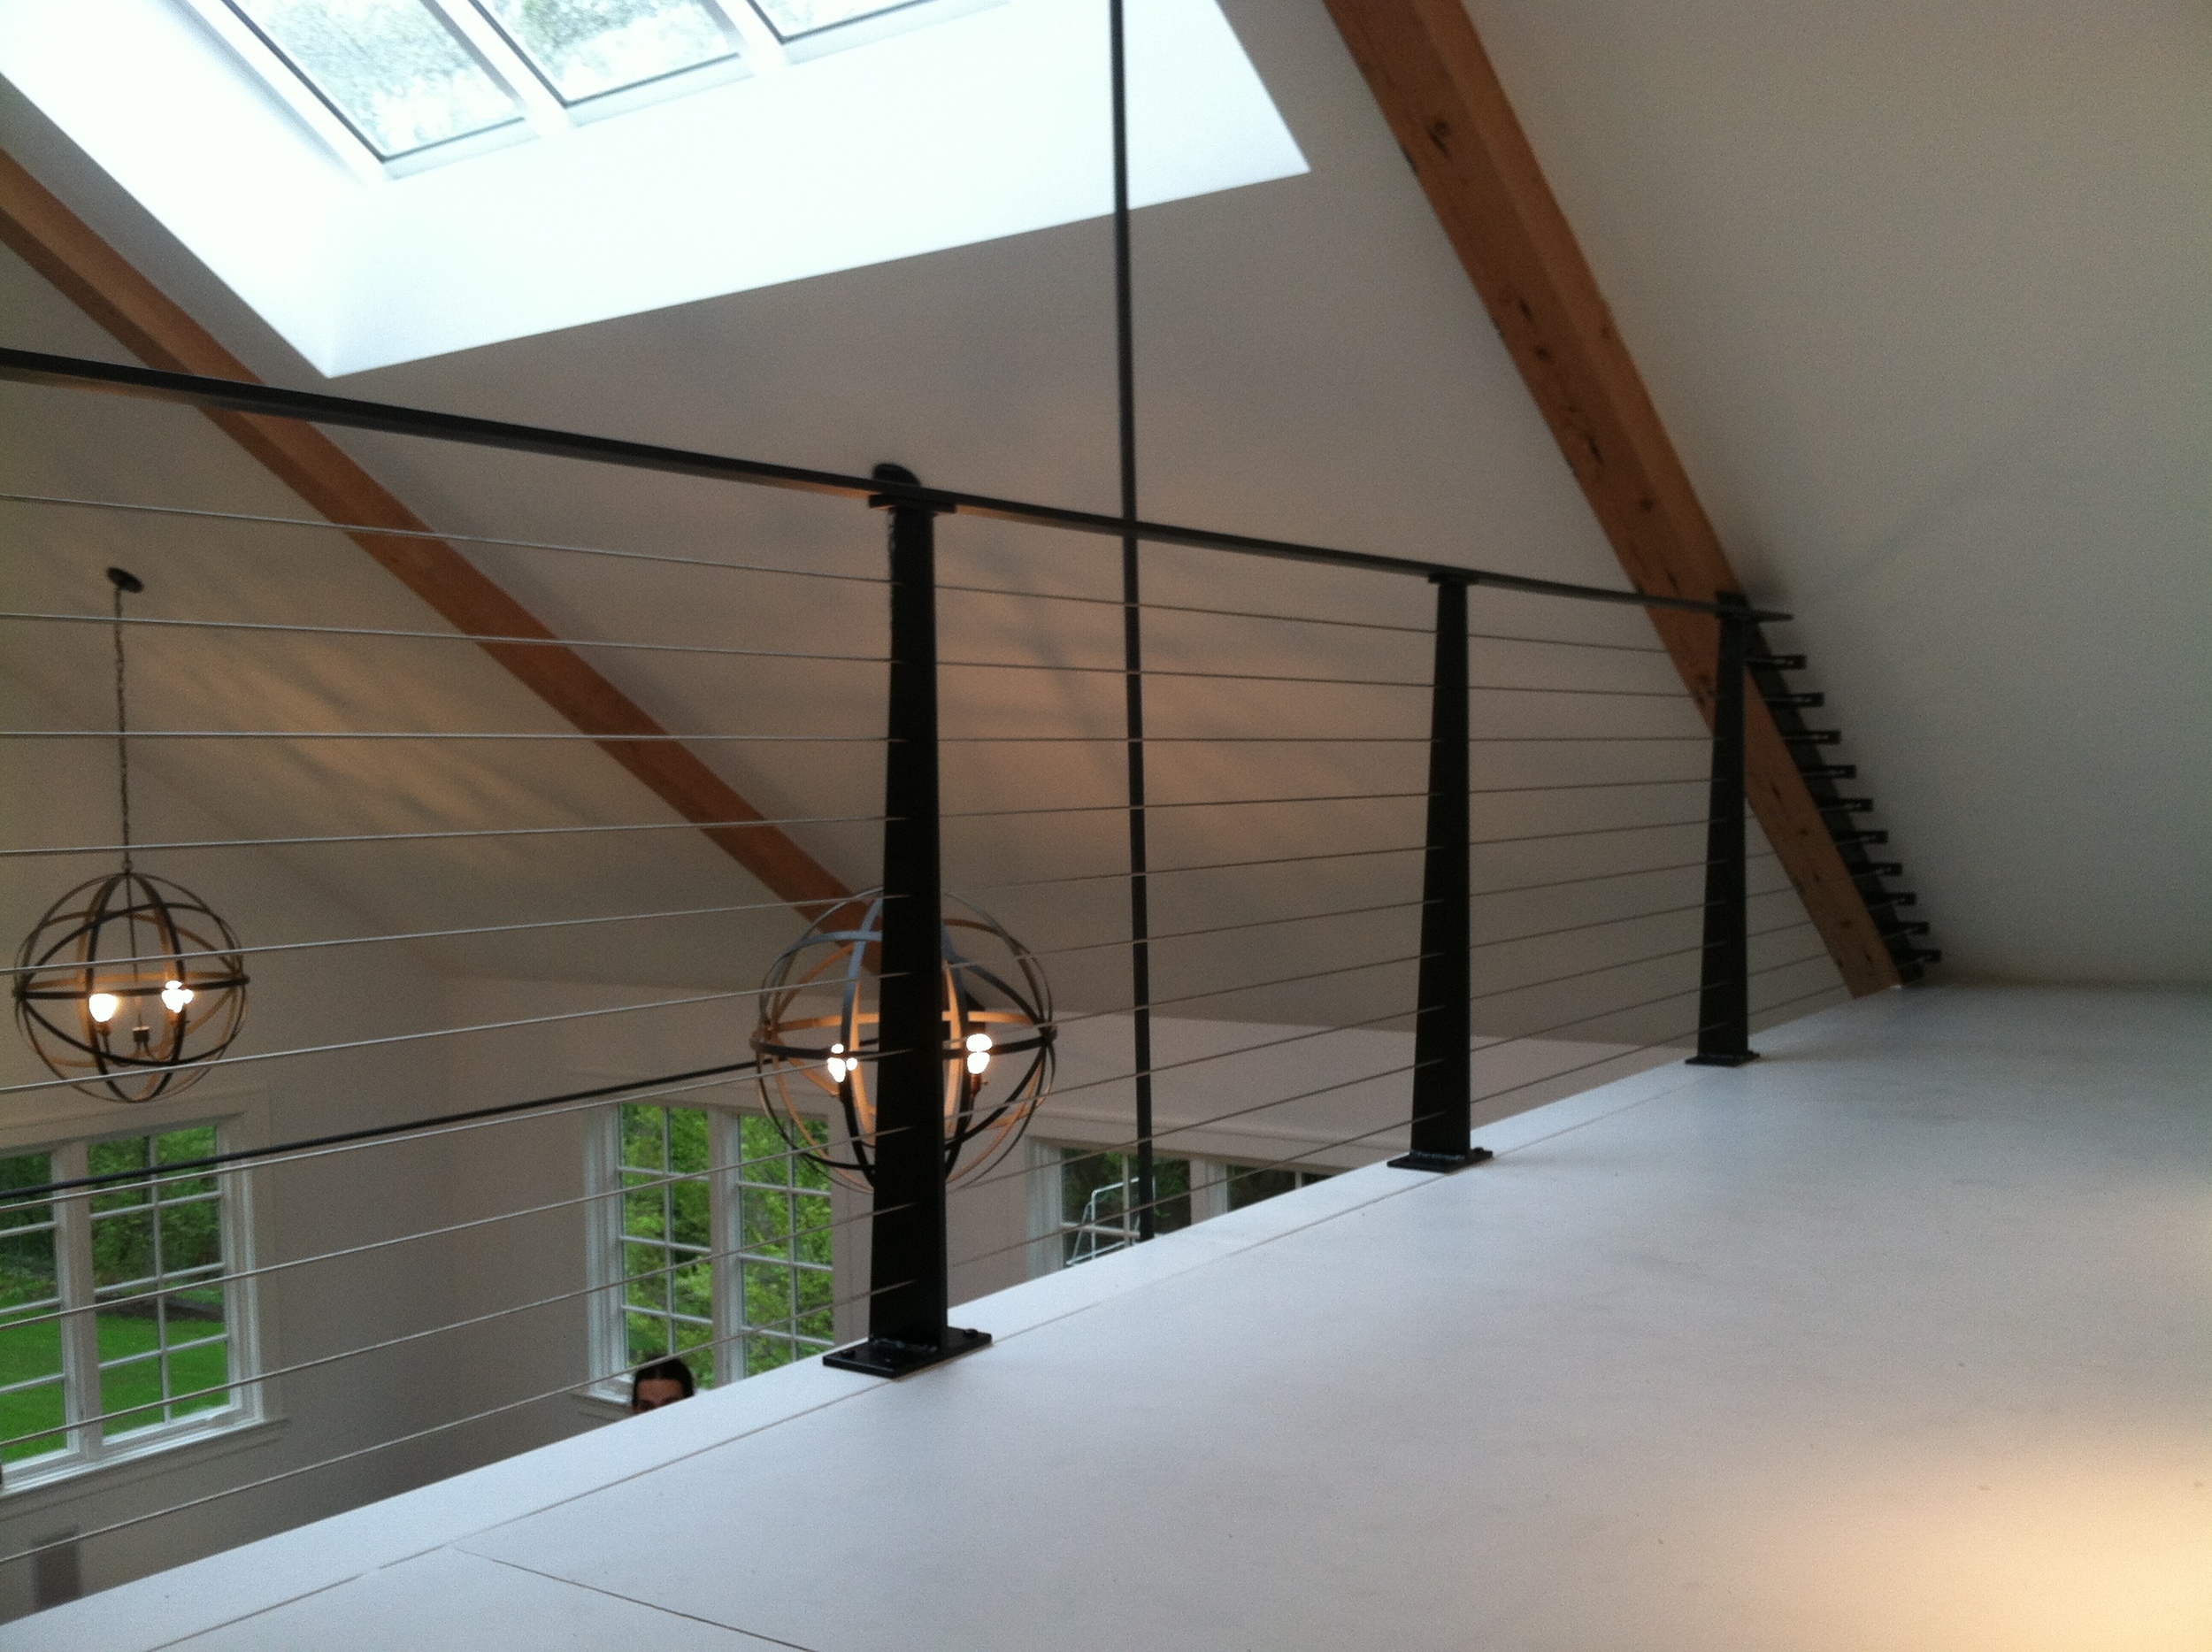 Stainless Steel Wire Railing, with Custom Steel Posts.